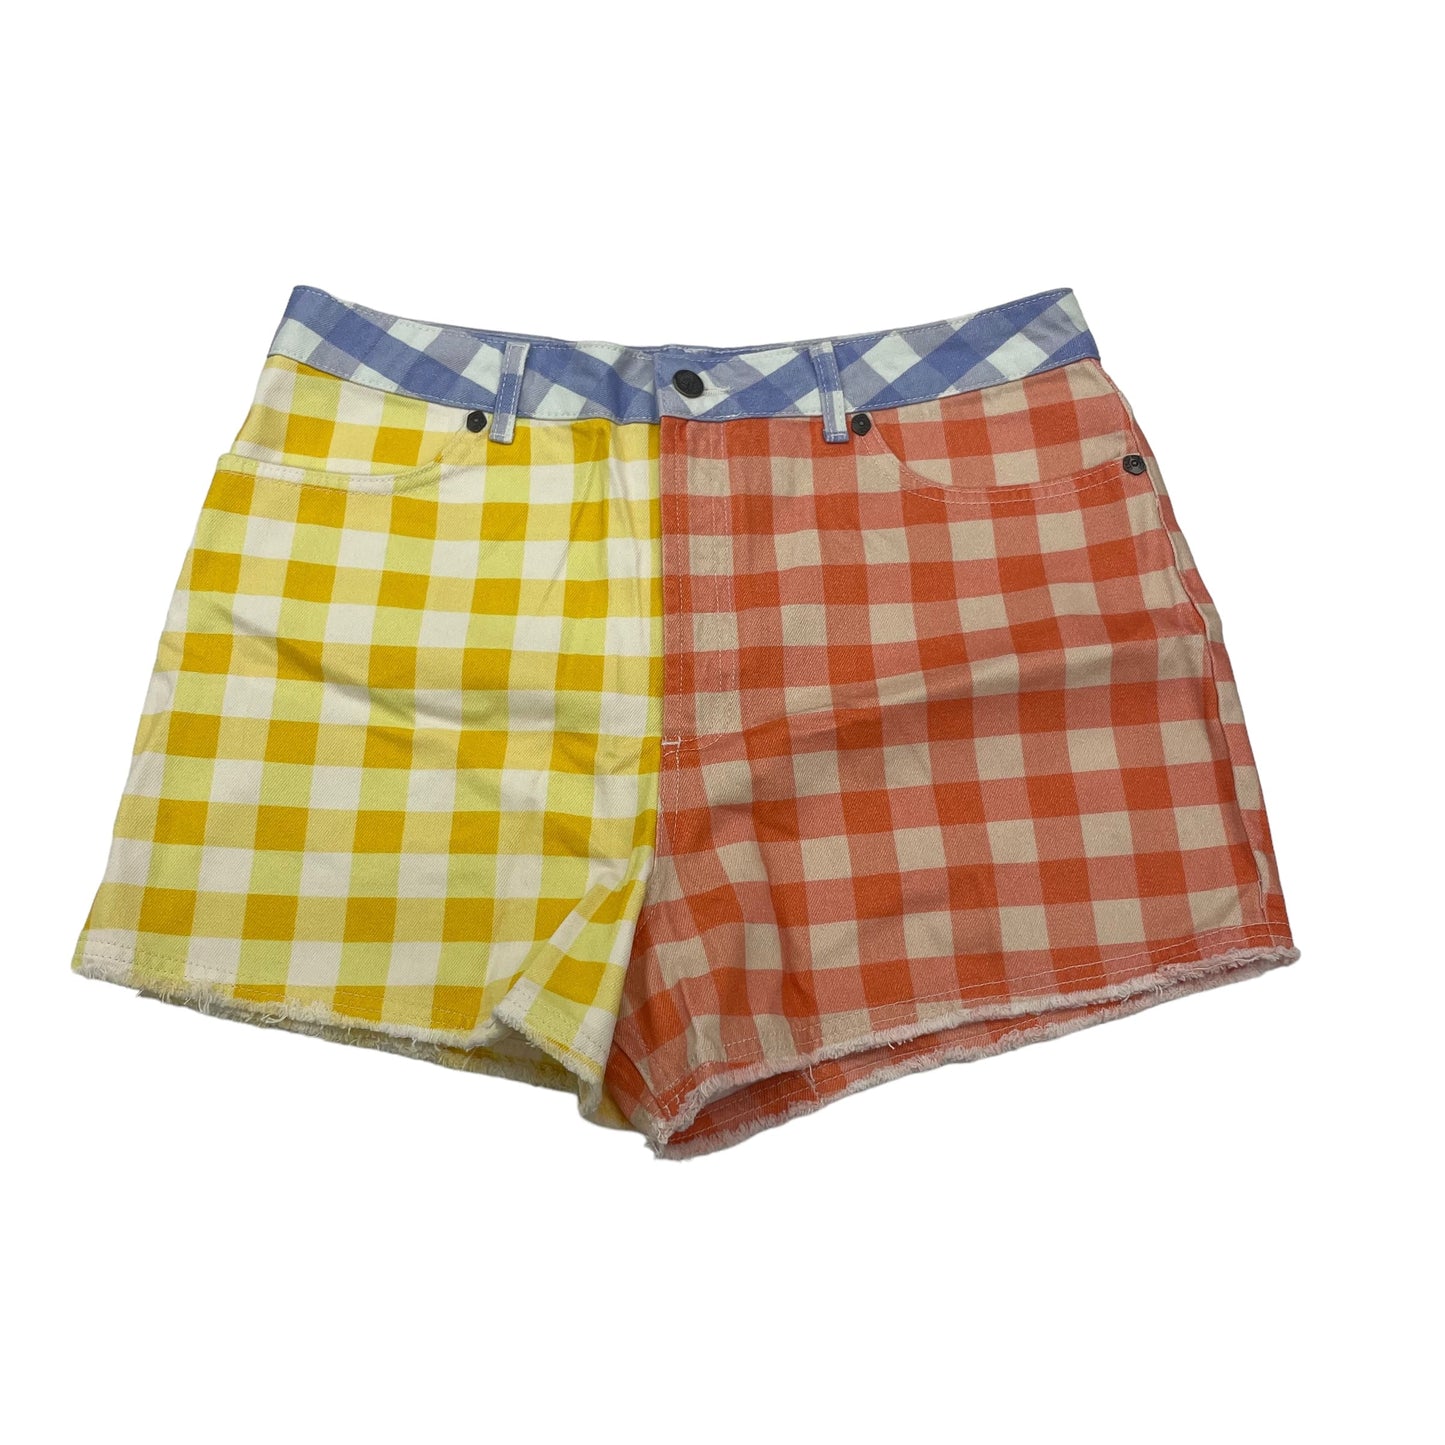 RED & YELLOW ANTHROPOLOGIE SHORTS, Size L